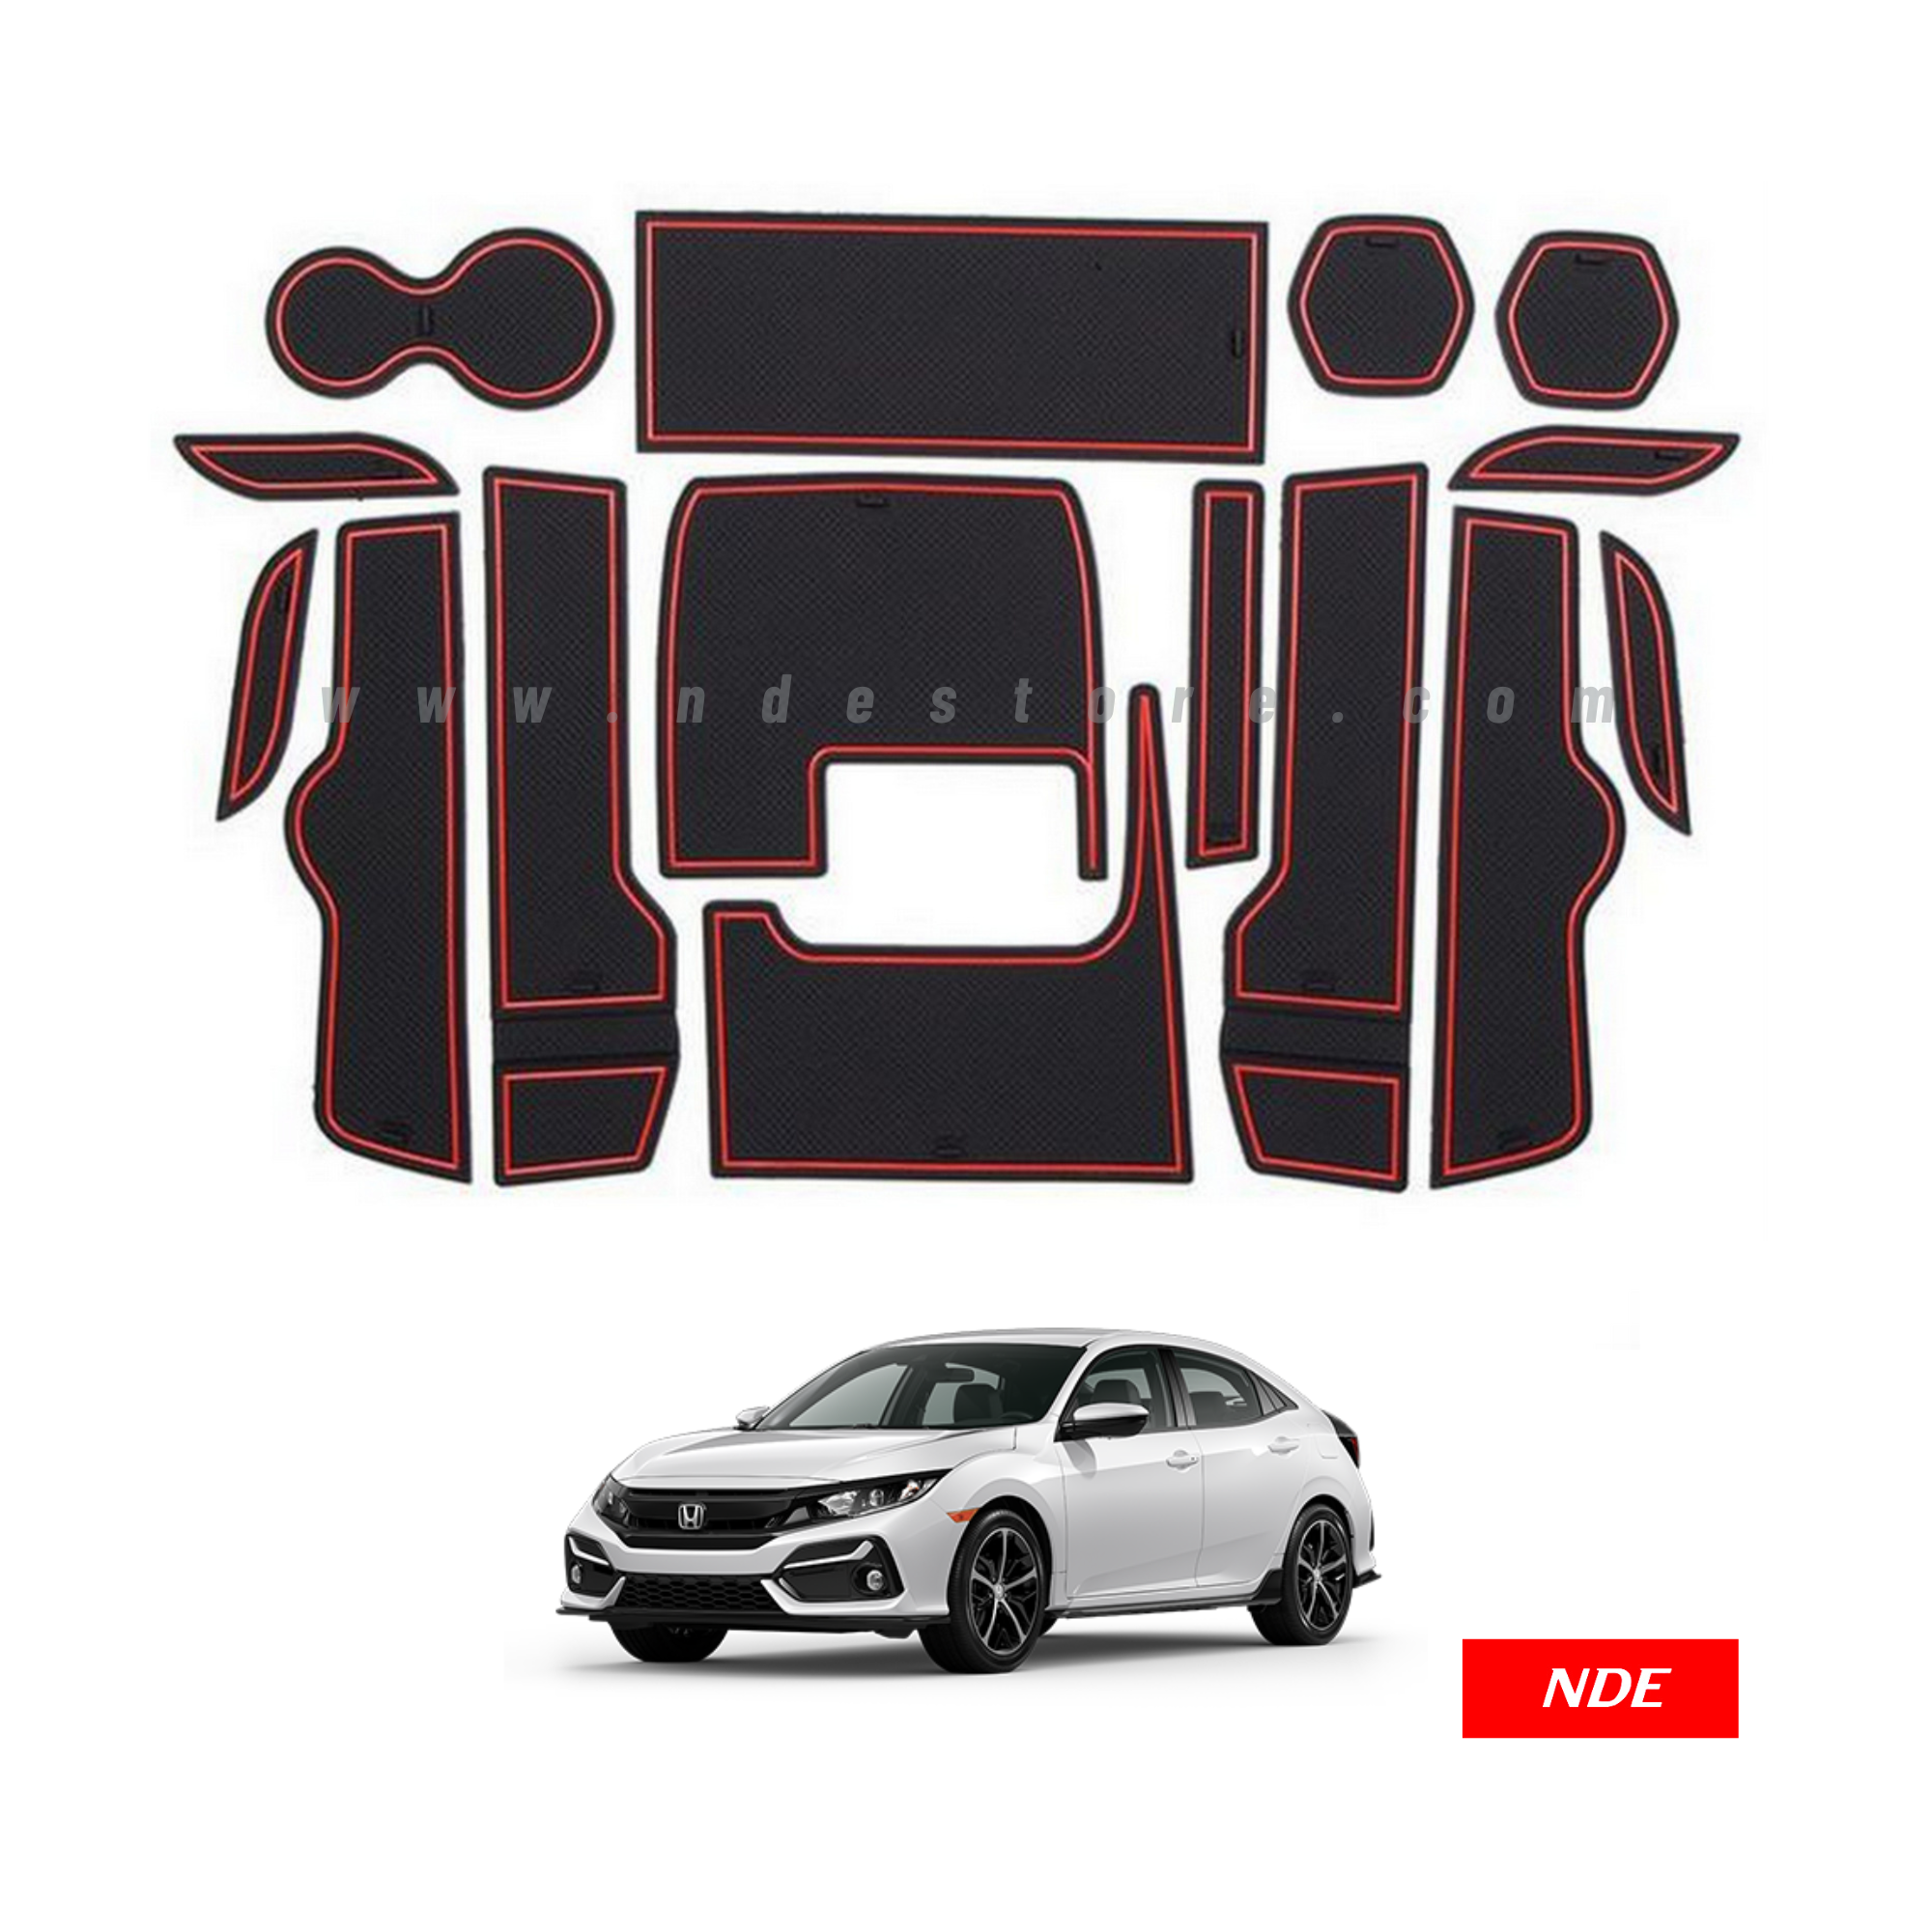 MATS FOR INTERIOR SURFACE PROTECTION FOR HONDA CIVIC (2016-2021)